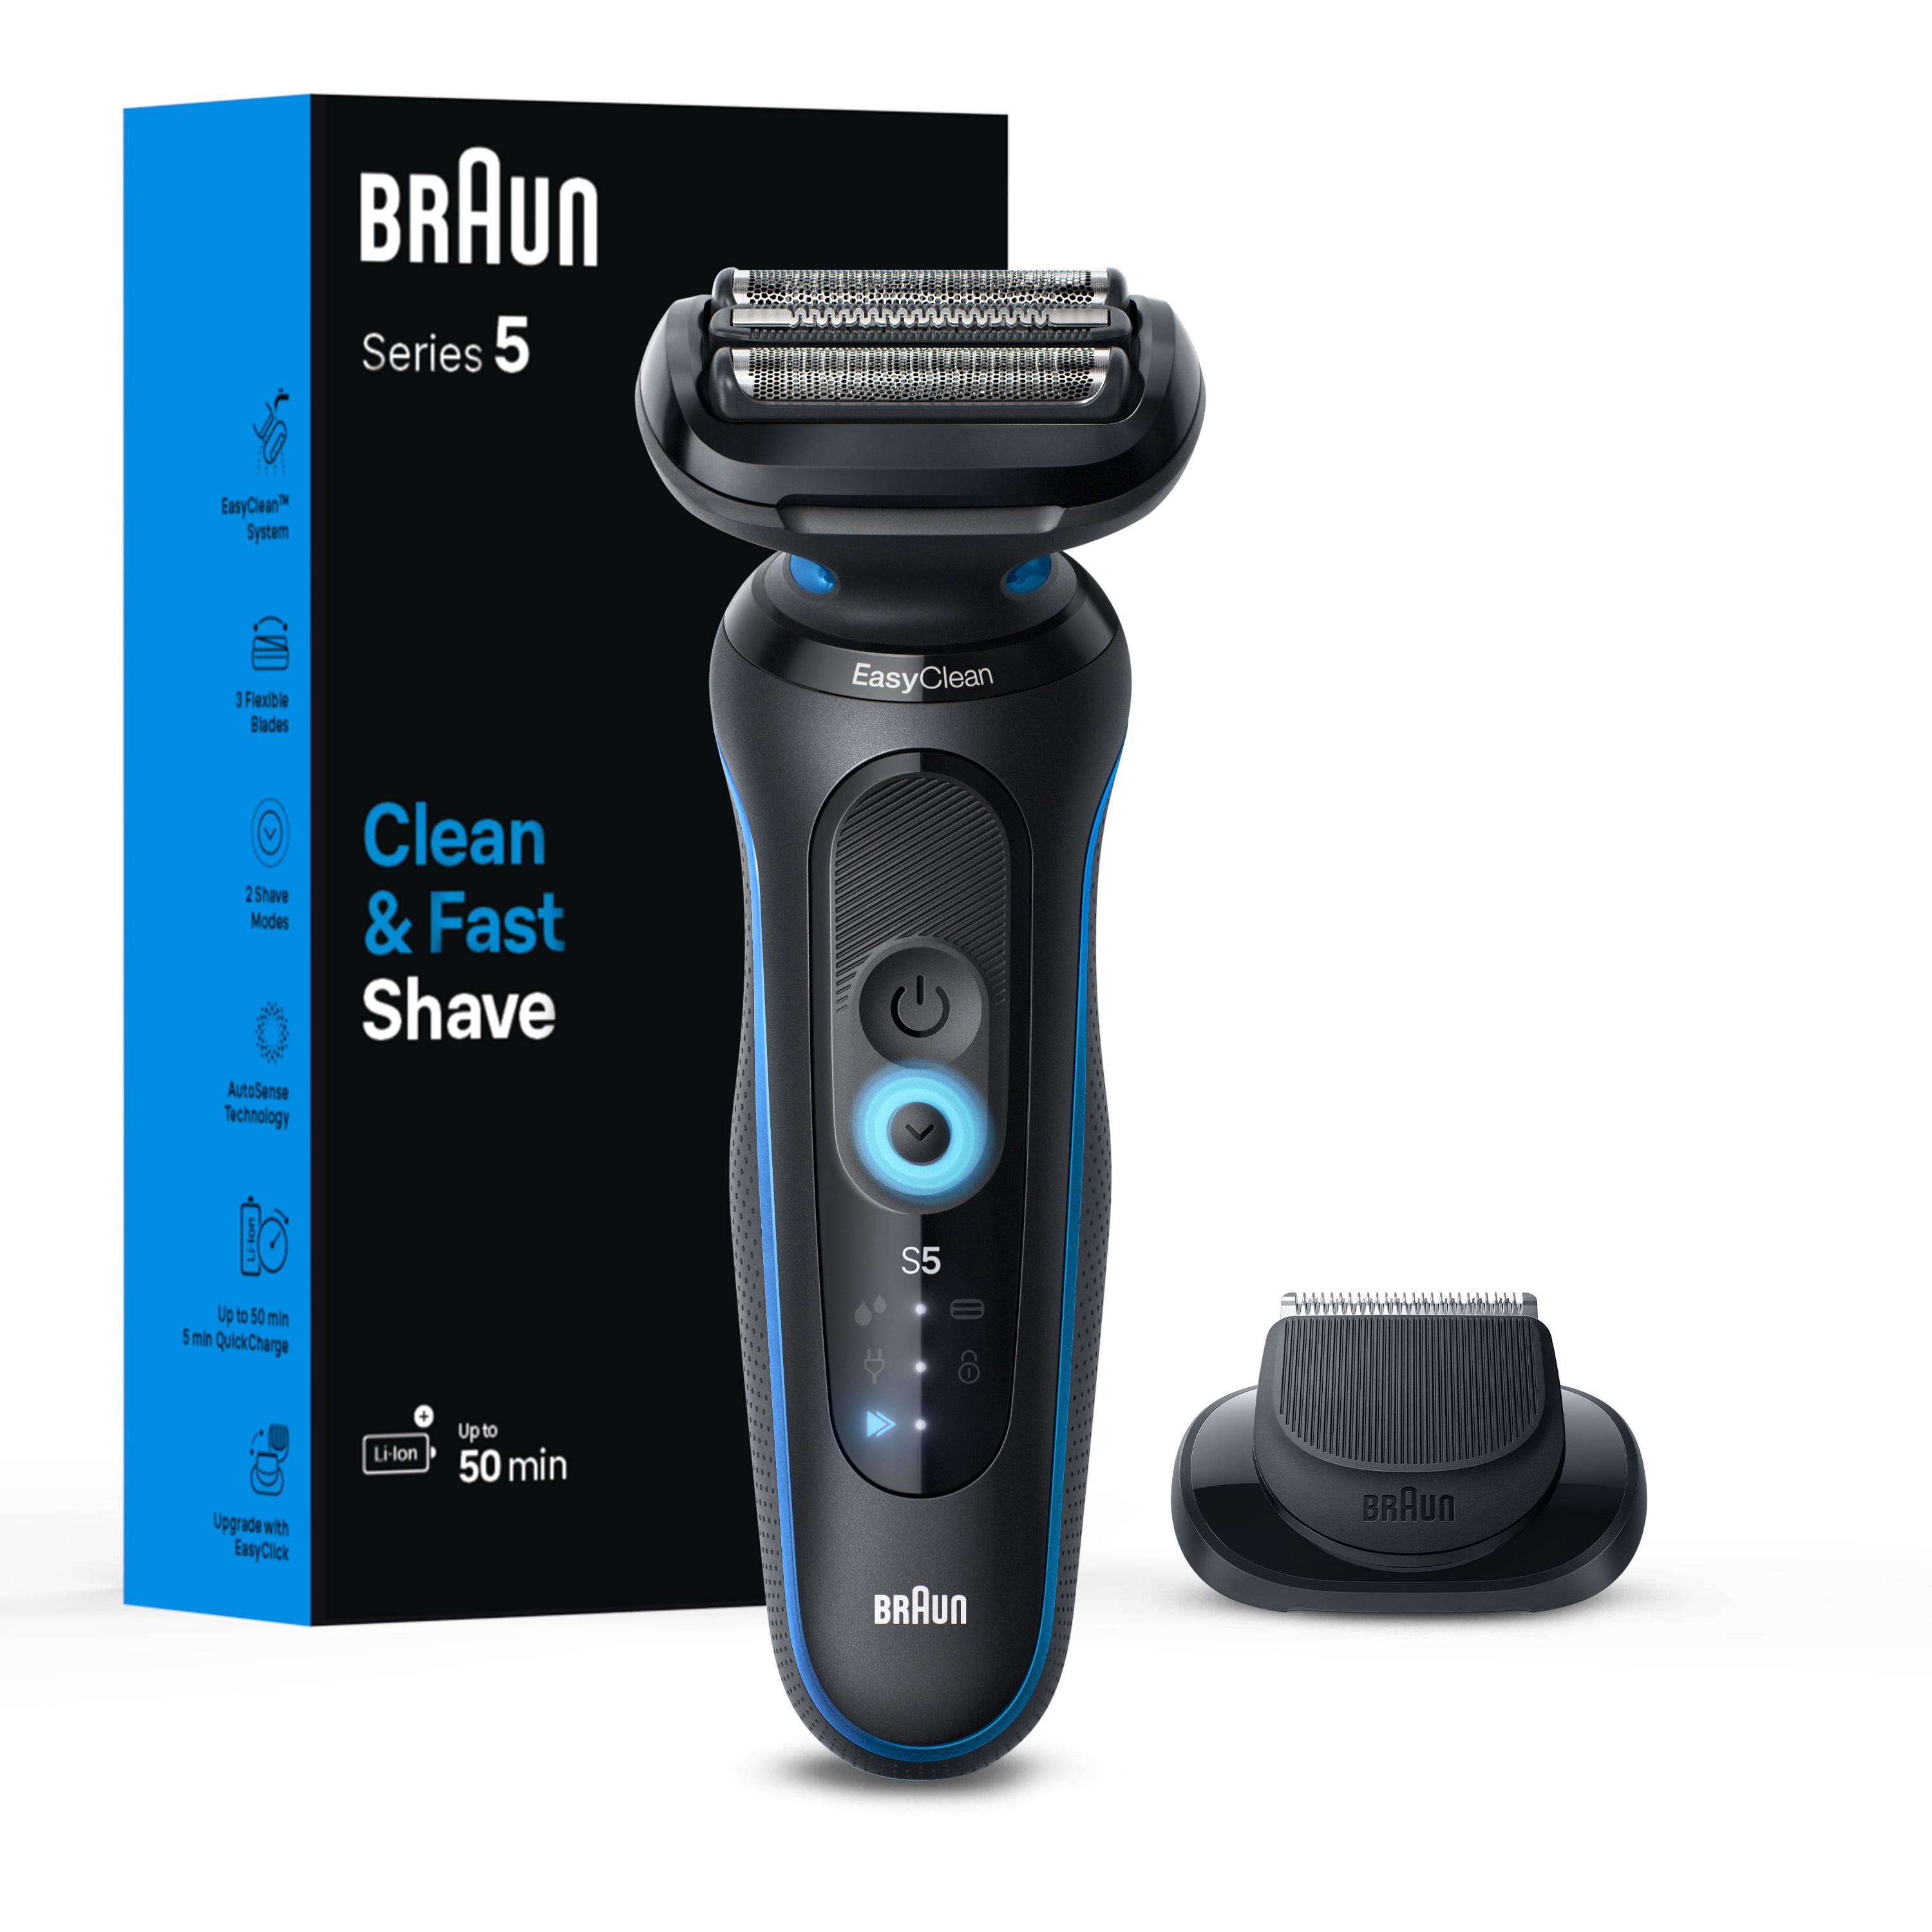 Braun Series 6 Rechargeable Electric Razor For Men 